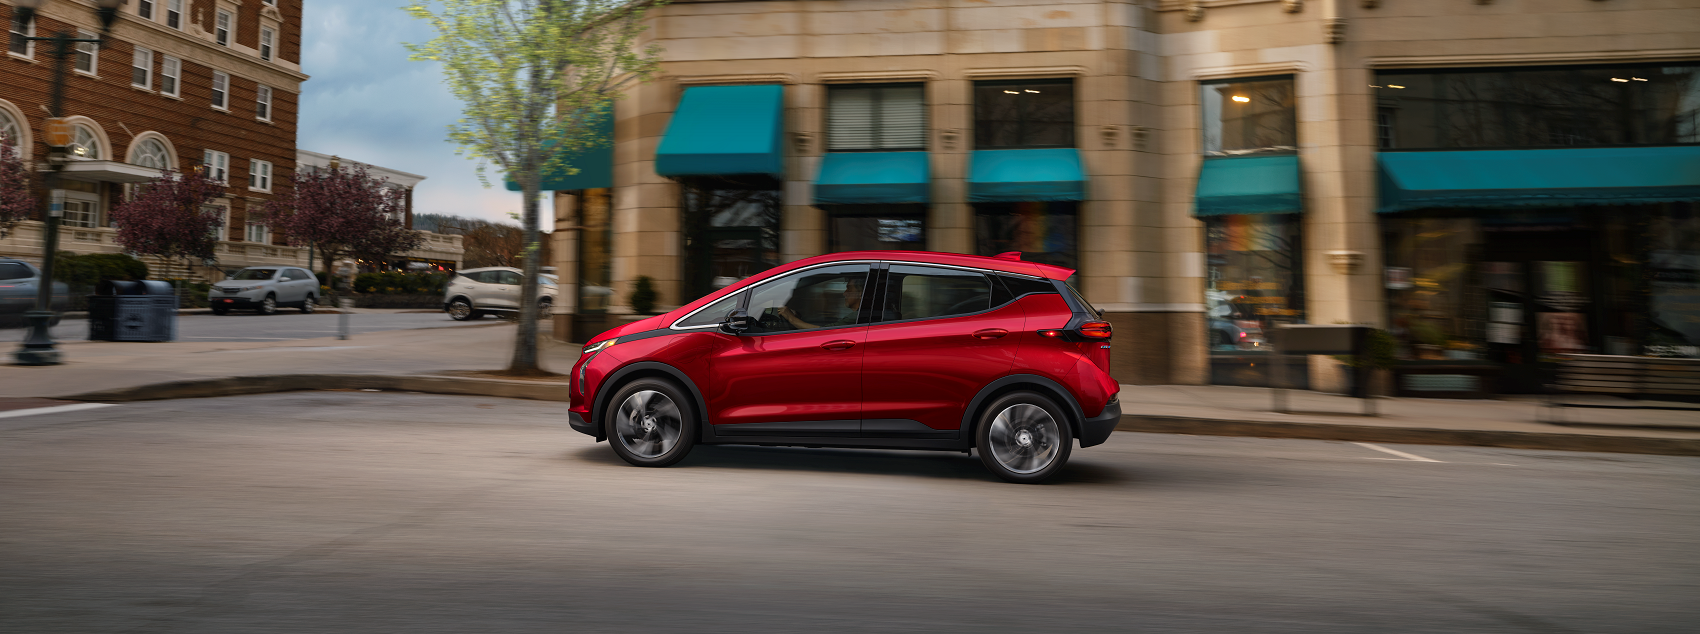 Chevy Bolt Lease Deals Plymouth MI